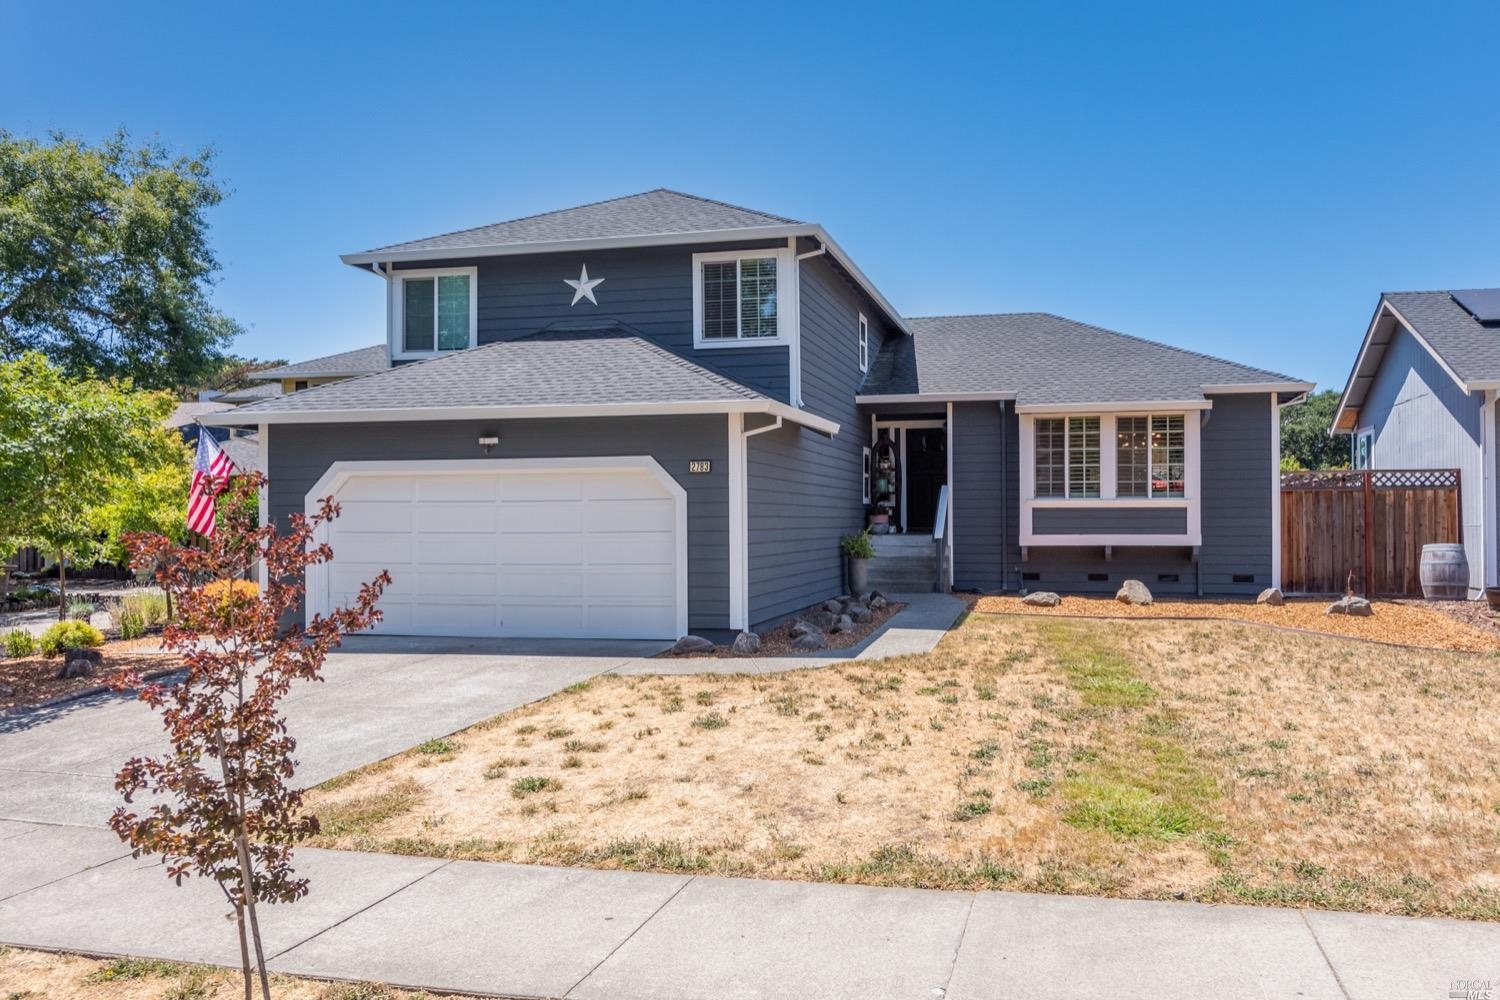 Homes for sale in Santa Rosa | View 2783 Royal Oak Place | 4 Beds, 3 Baths